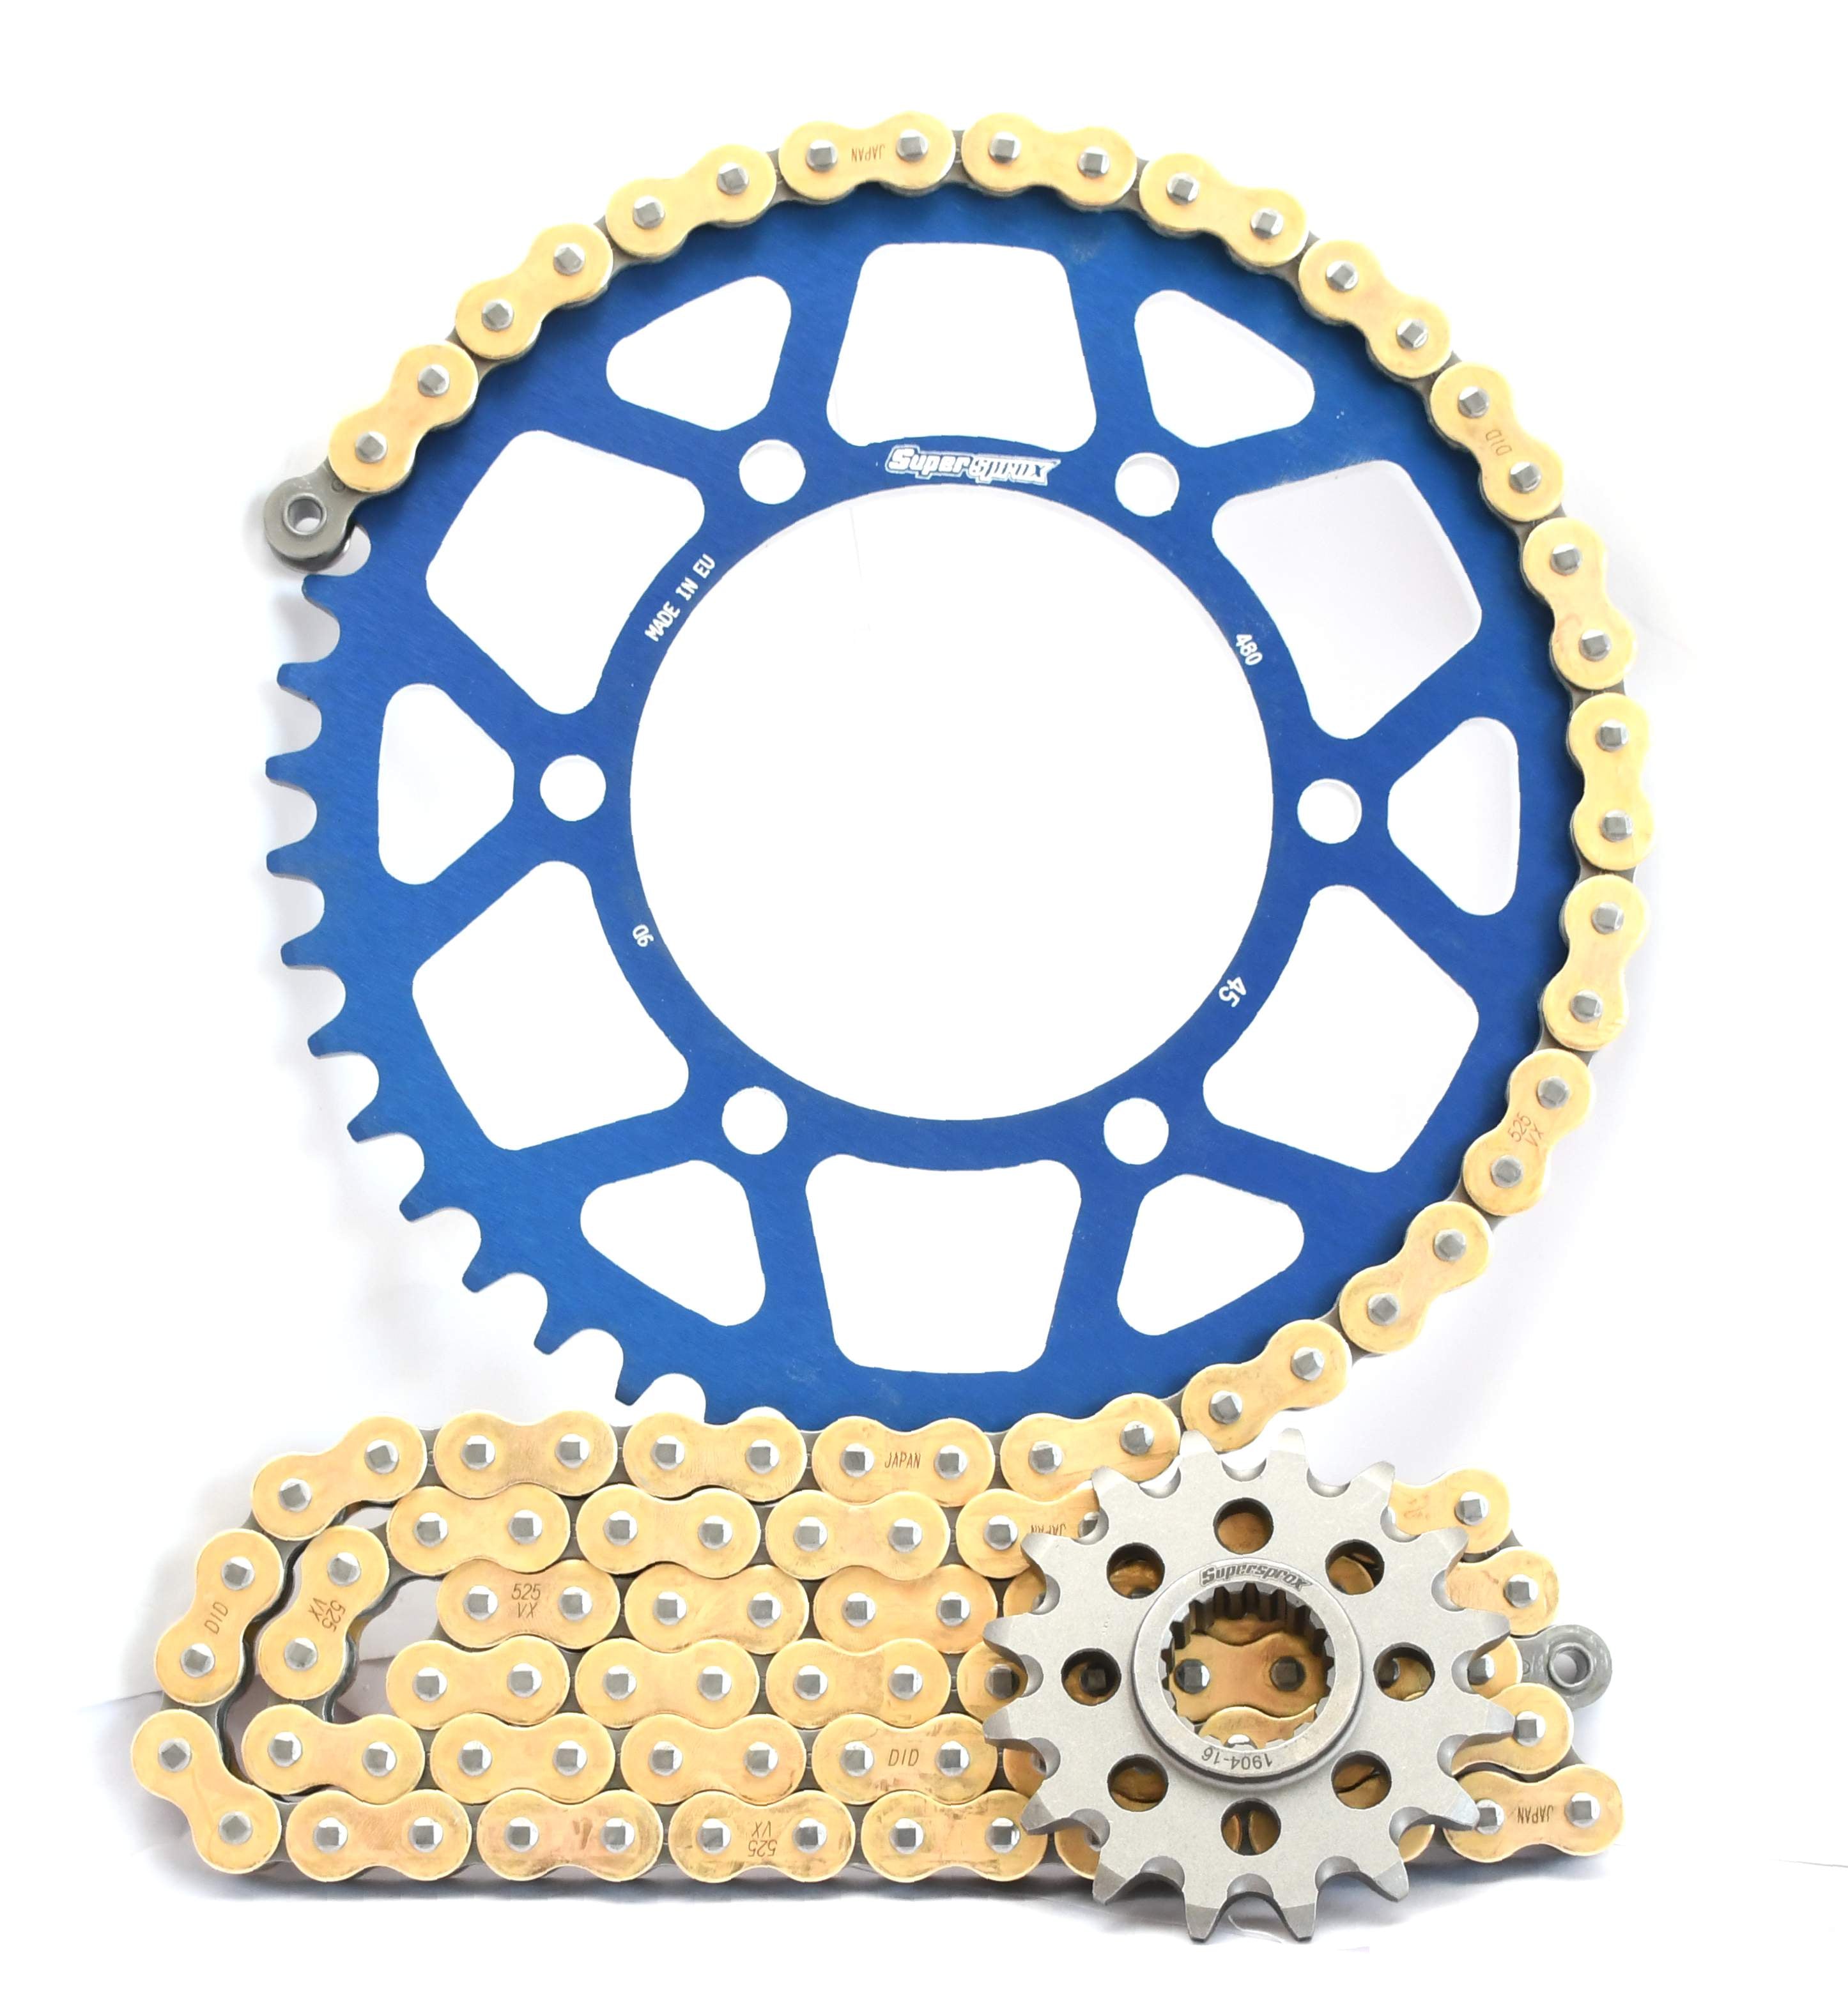 Supersprox/DID Chain & Sprocket Kit Yamaha YZF R1 1998-2014 - Choose Your Gearing